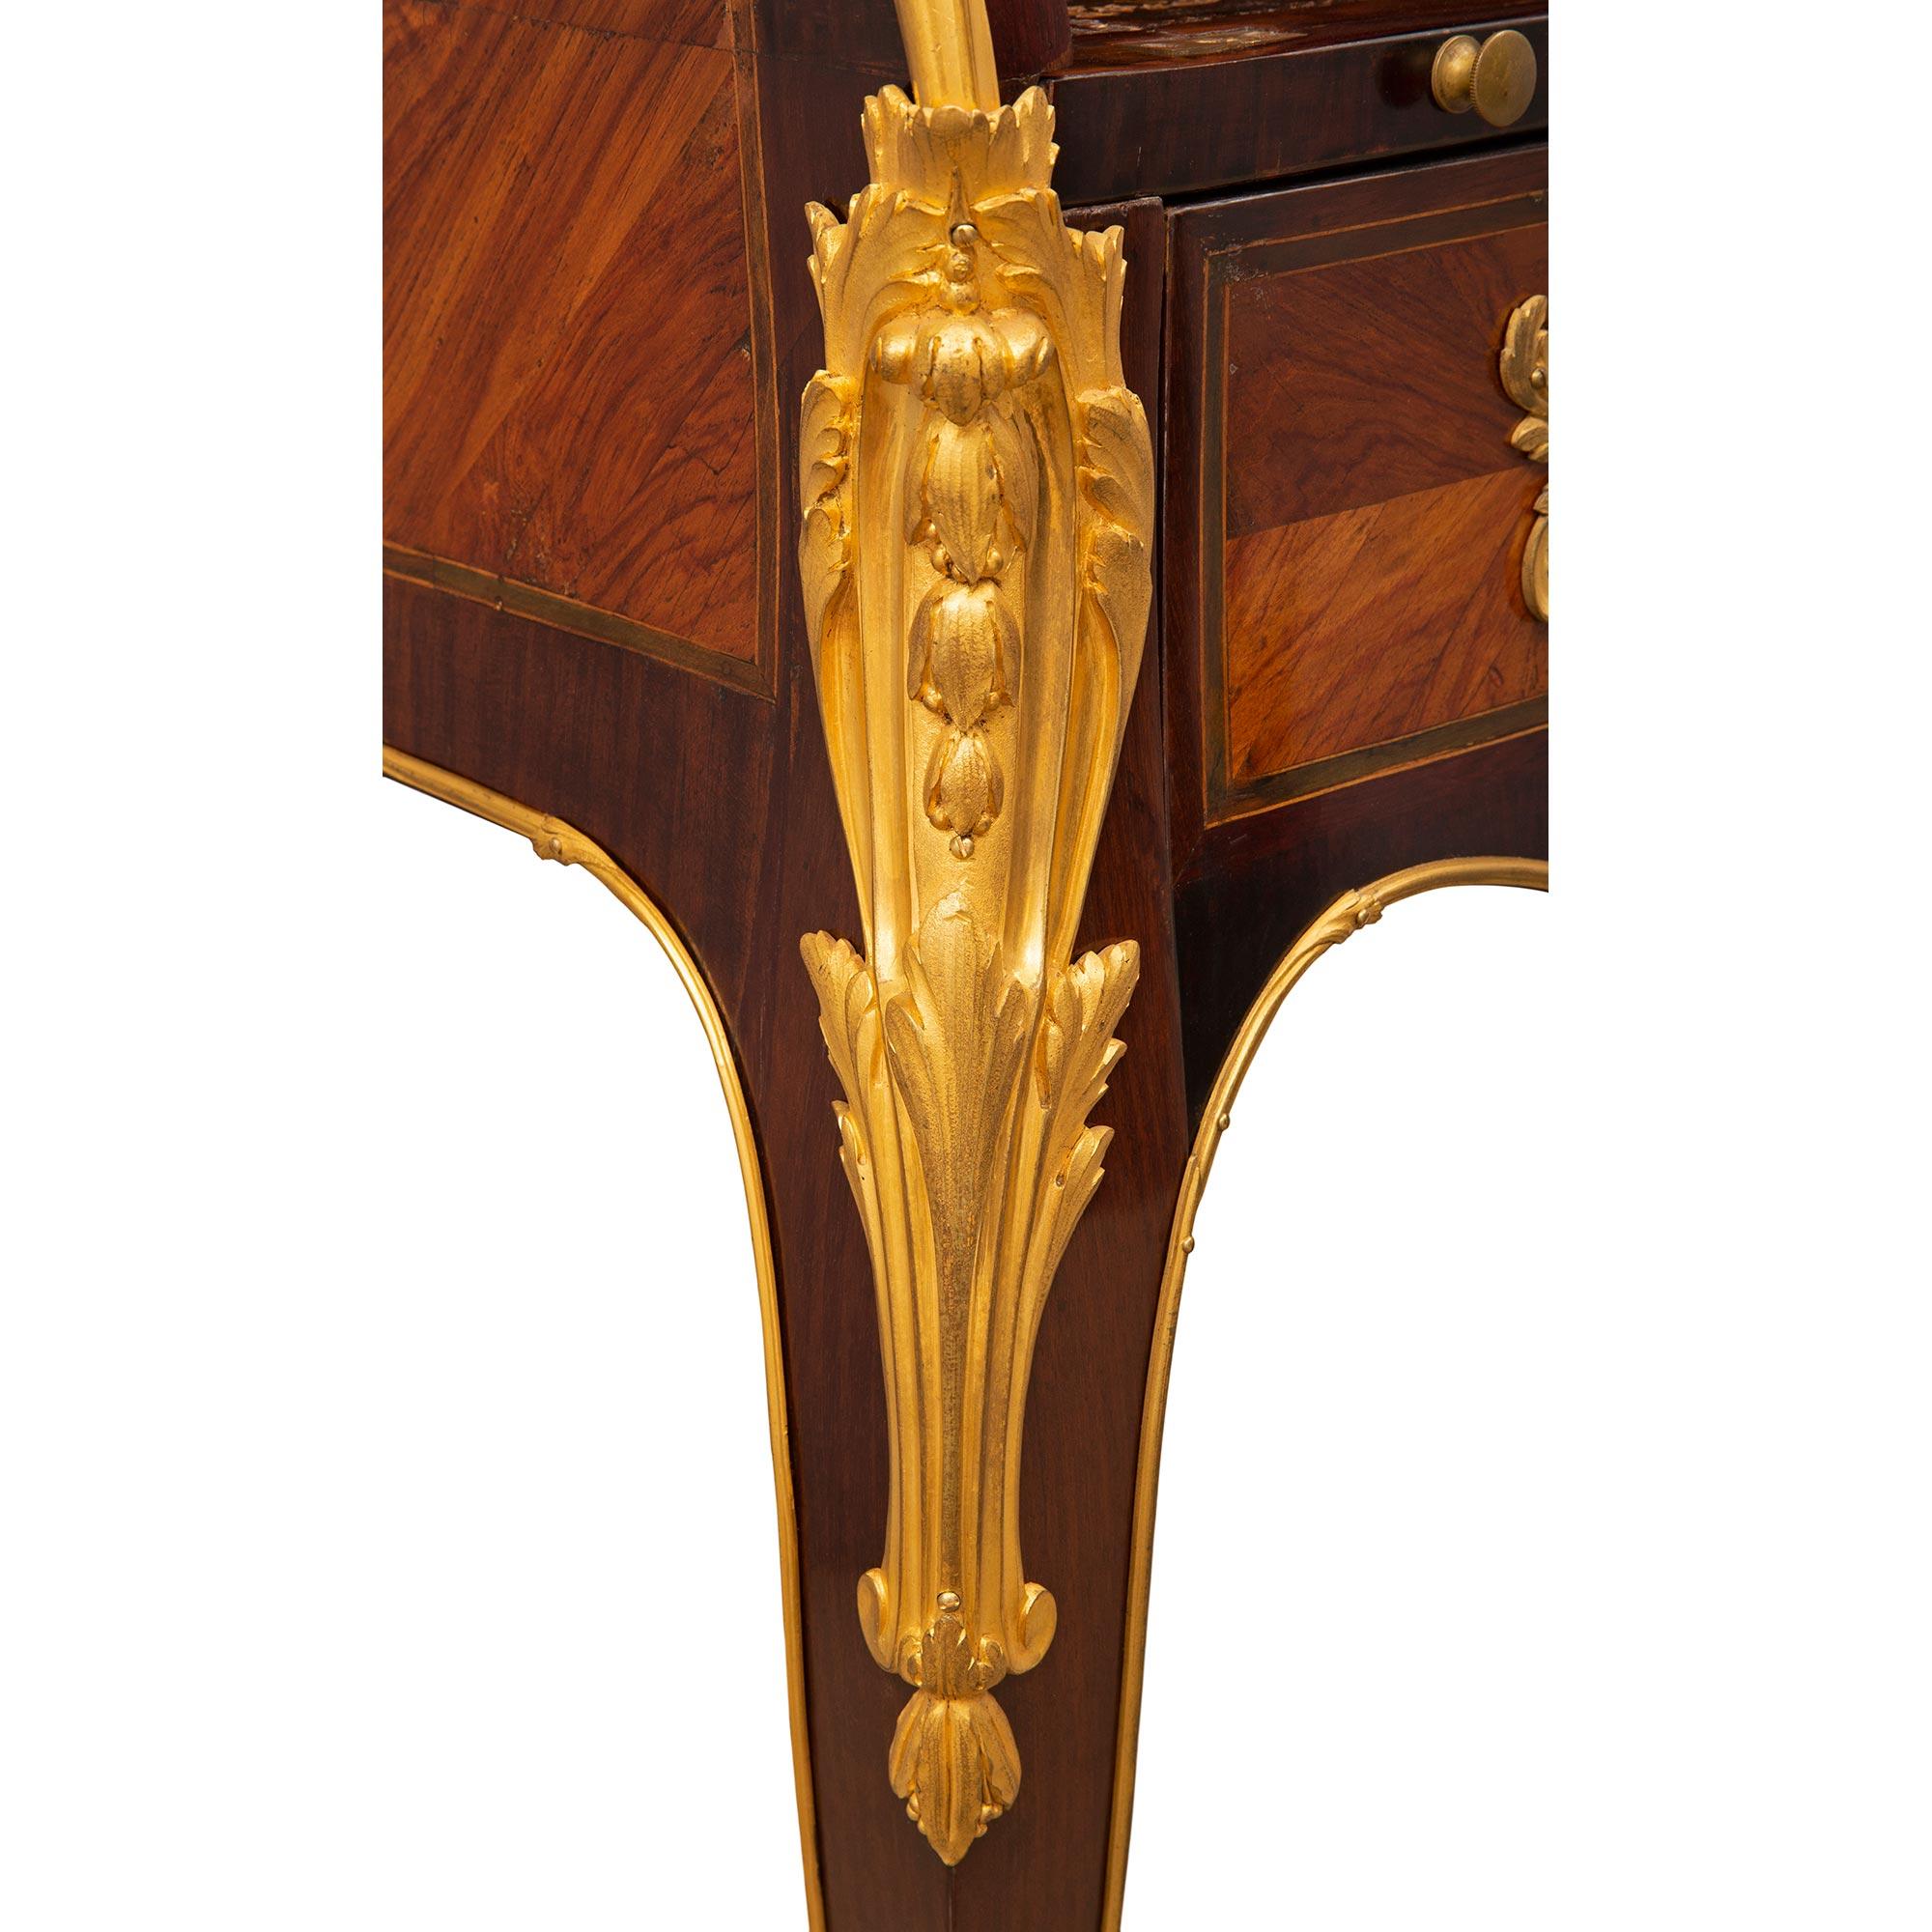 French 18th Century Louis XV Period Kingwood, Tulipwood and Ormolu Desk For Sale 8